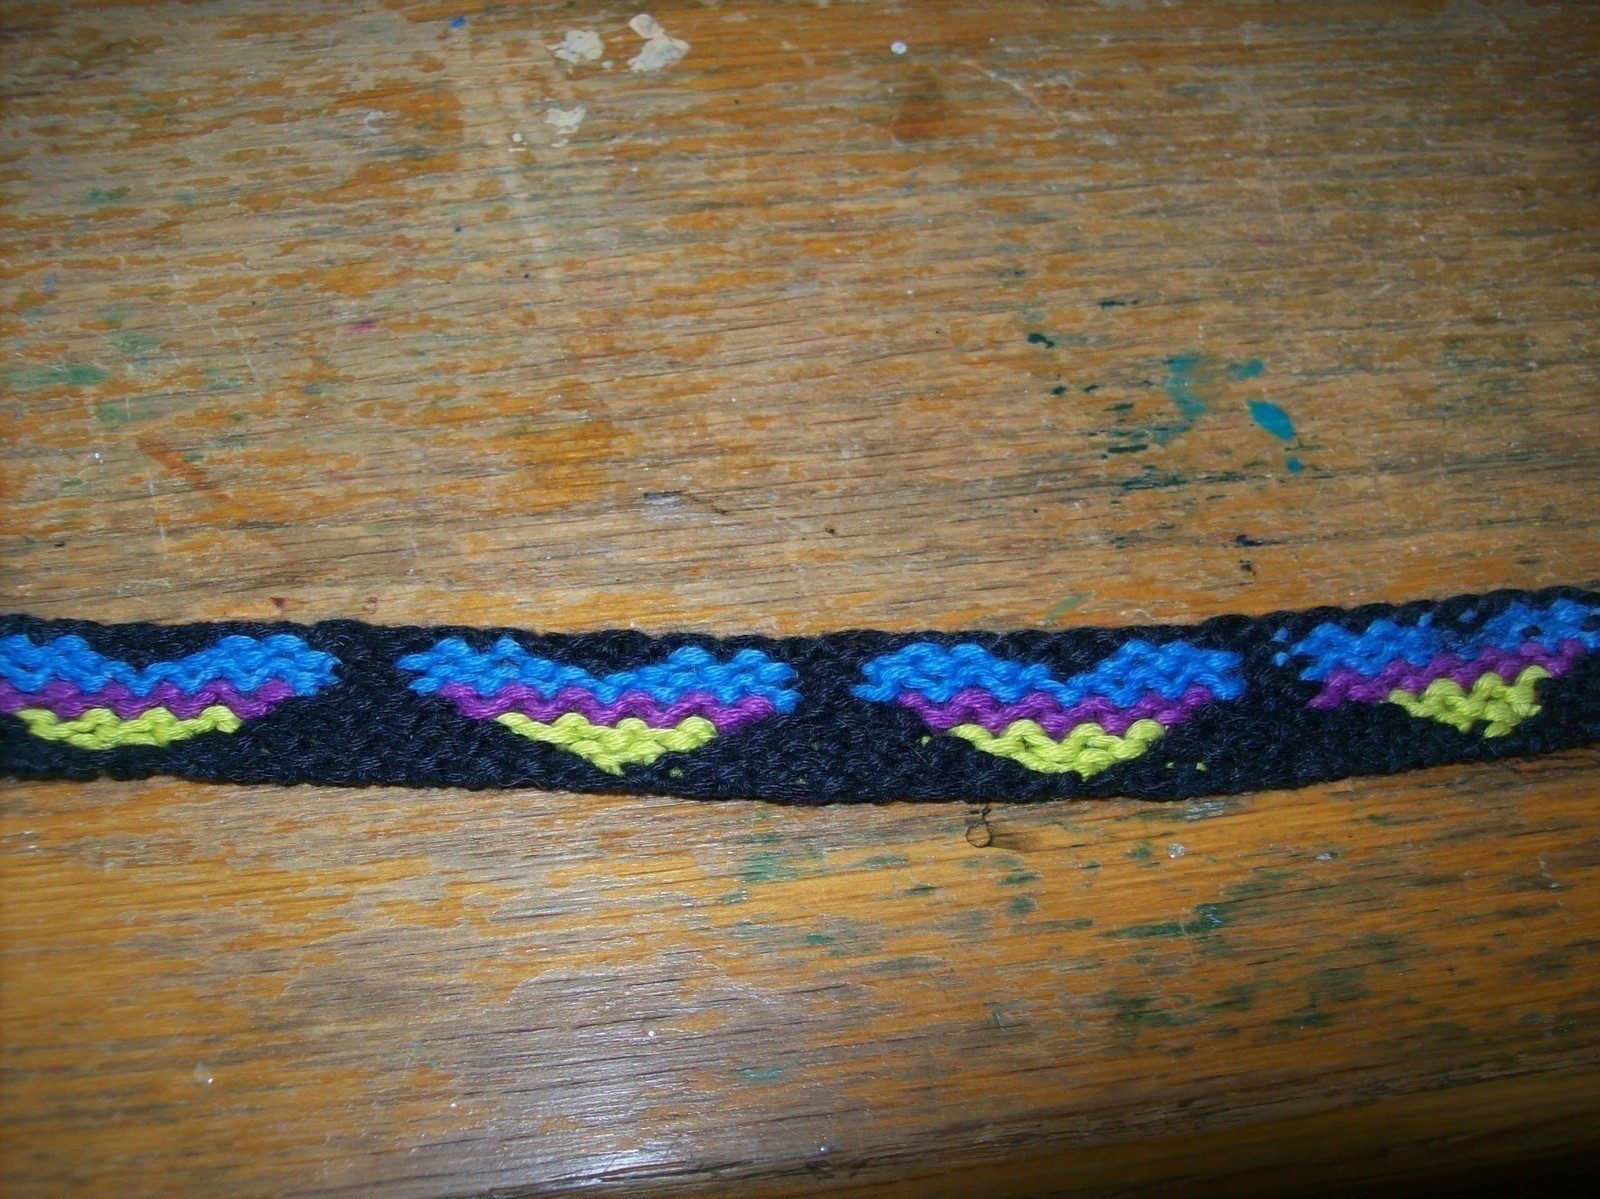 Bracelet Patterns With Embroidery Floss Embroidery Floss Friendship Bracelets A Friendship Bracelet